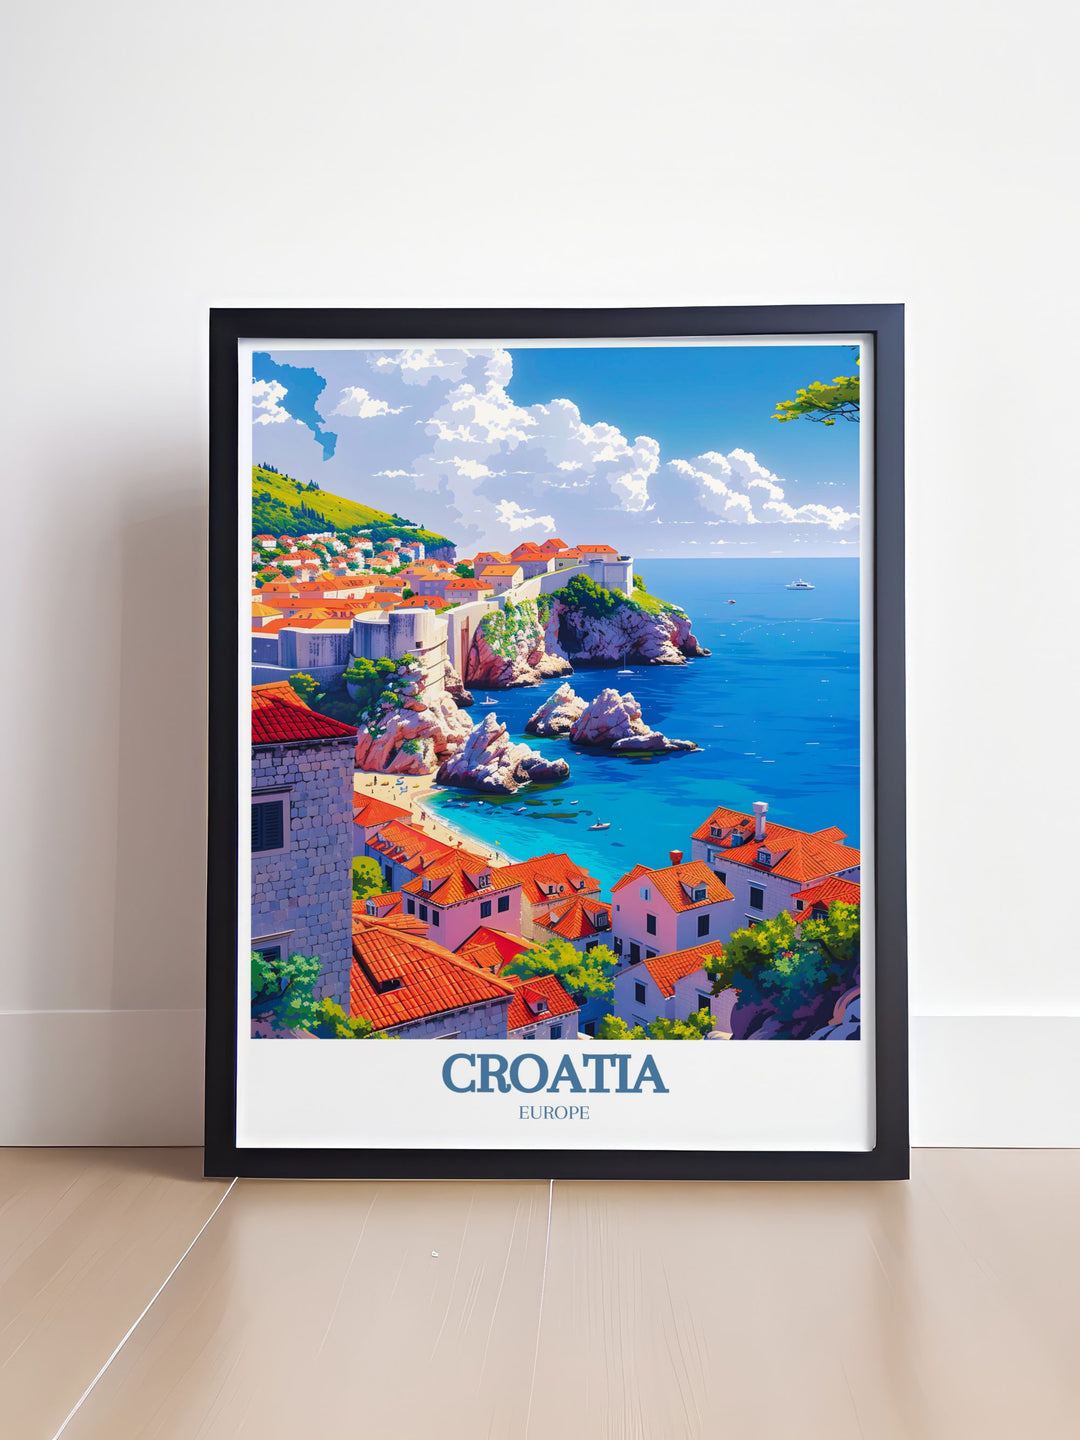 Highlighting the scenic vistas of Dubrovnik Old Town and the vibrant Adriatic Sea, this travel poster is perfect for those who appreciate the rich history and scenic richness of Croatia.